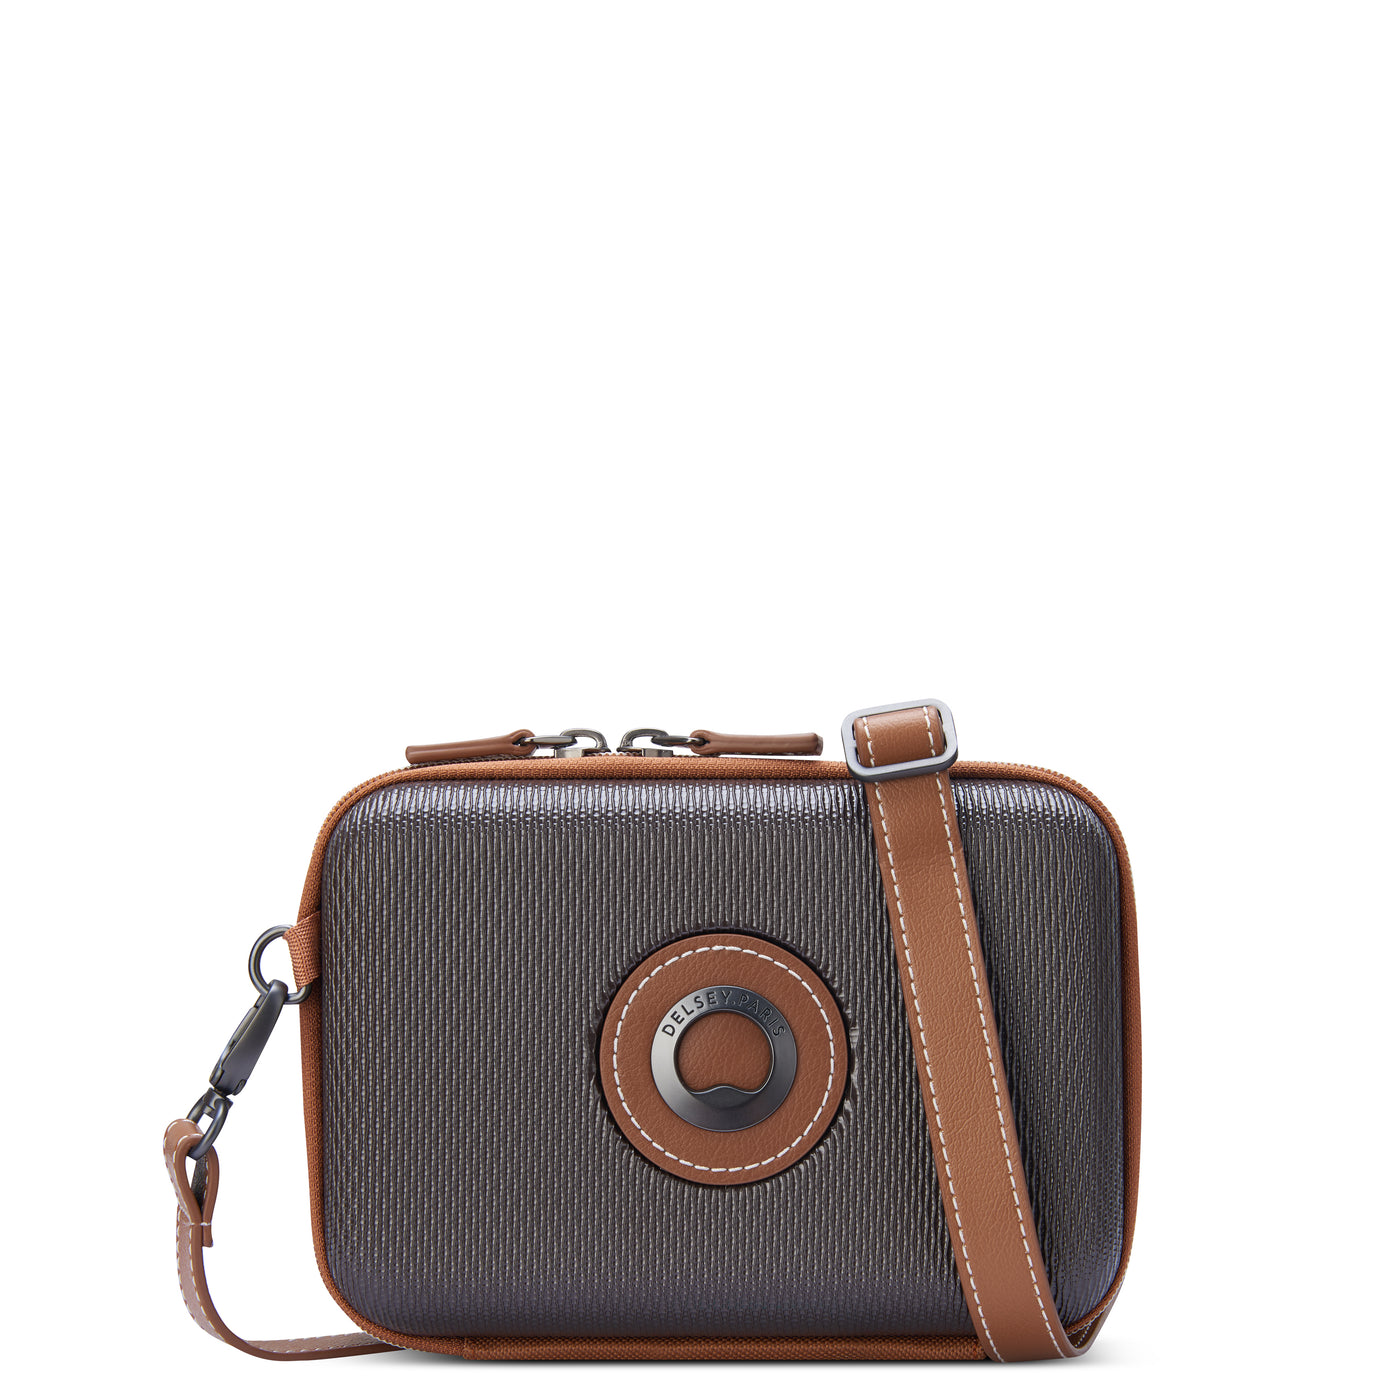 Shop The Latest Collection Of Delsey Chatelet Air 2.0 Clutch In Lebanon